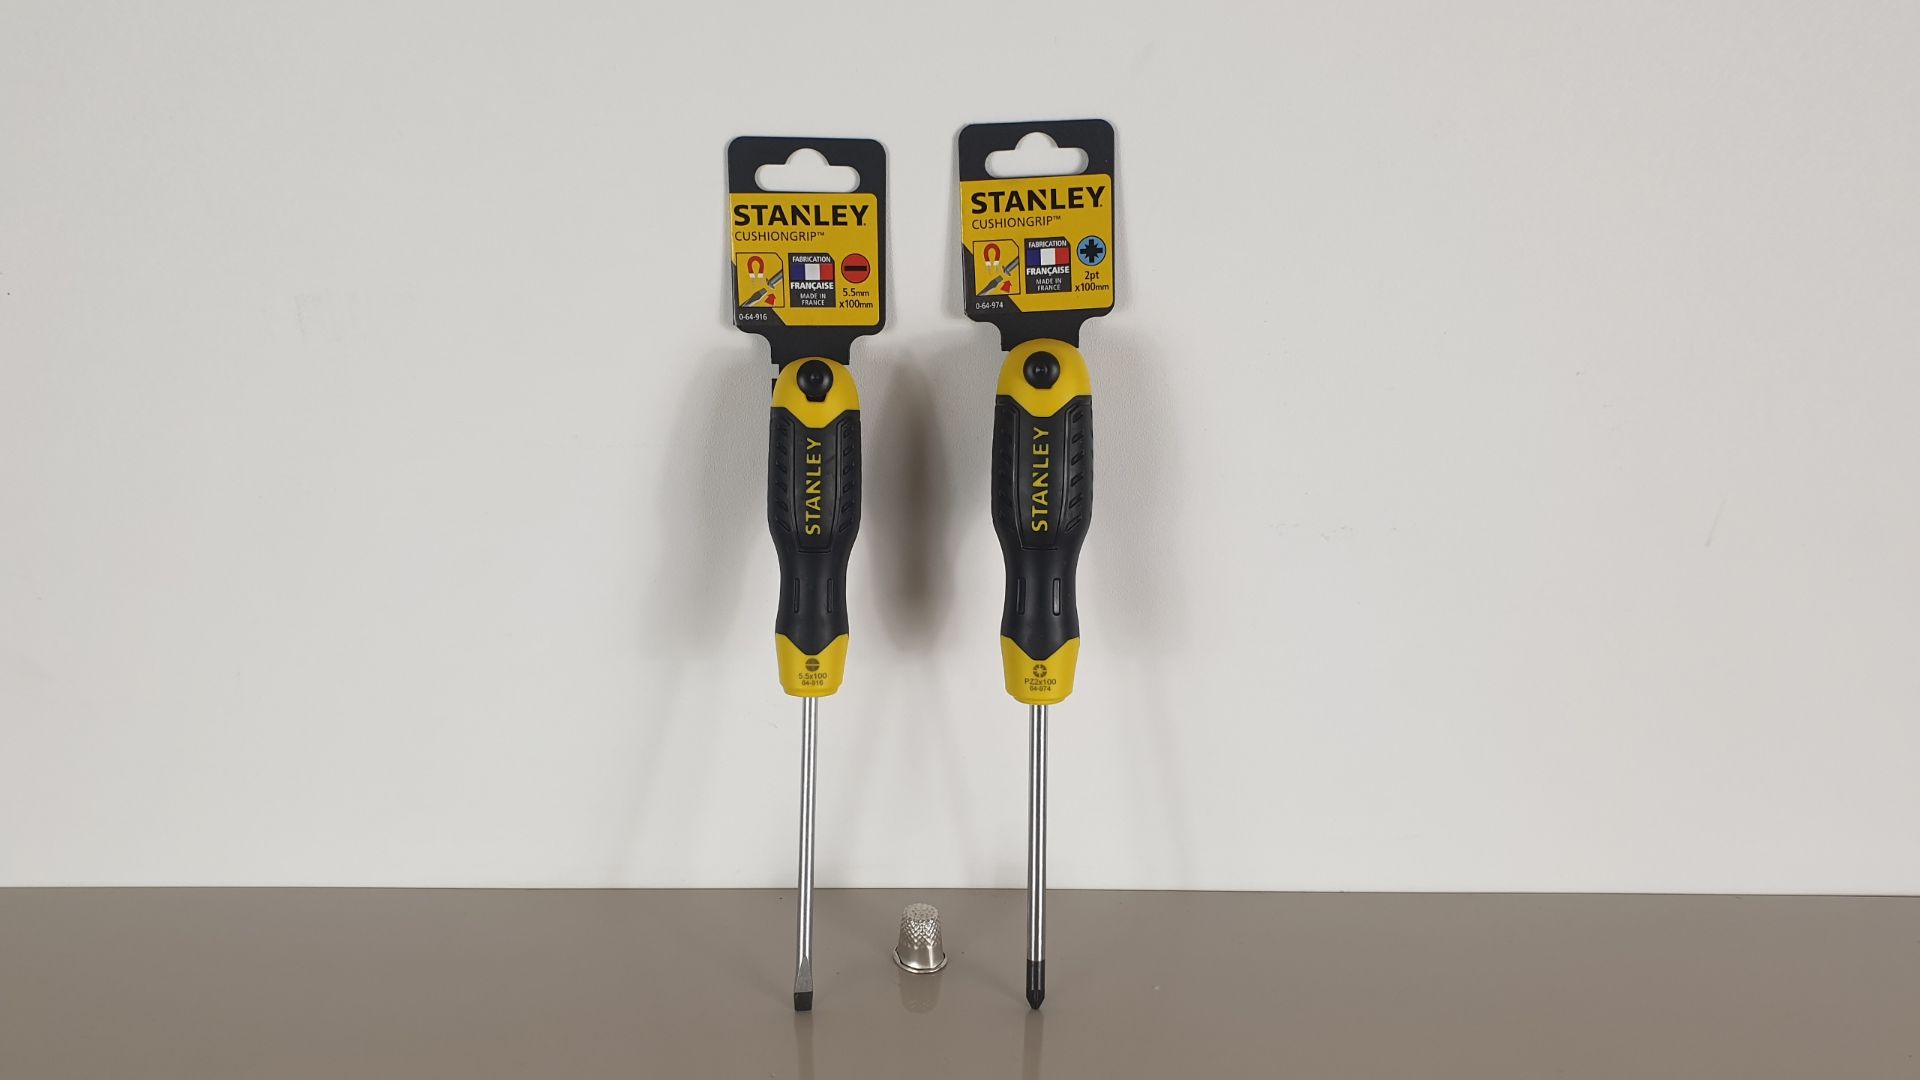 (LOT FOR THURSDAY 28TH MAY AUCTION) 20 X BRAND NEW STANLEY SCREWDRIVERS (10 X PHILLIPS PZ2, 10 X